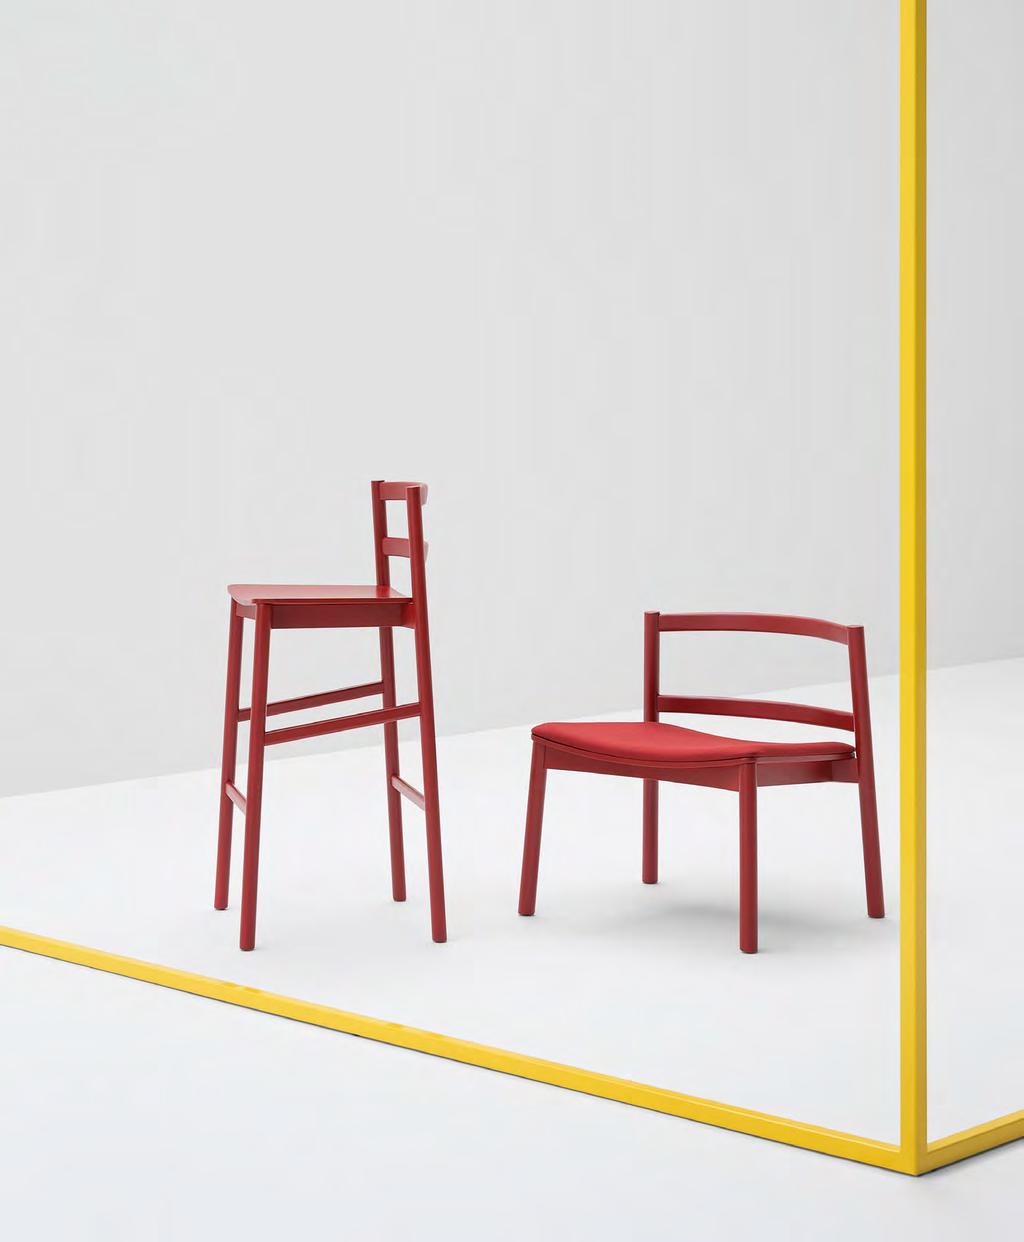 Load takes its inspiration from Scandinavian design to conjure up a new concept of